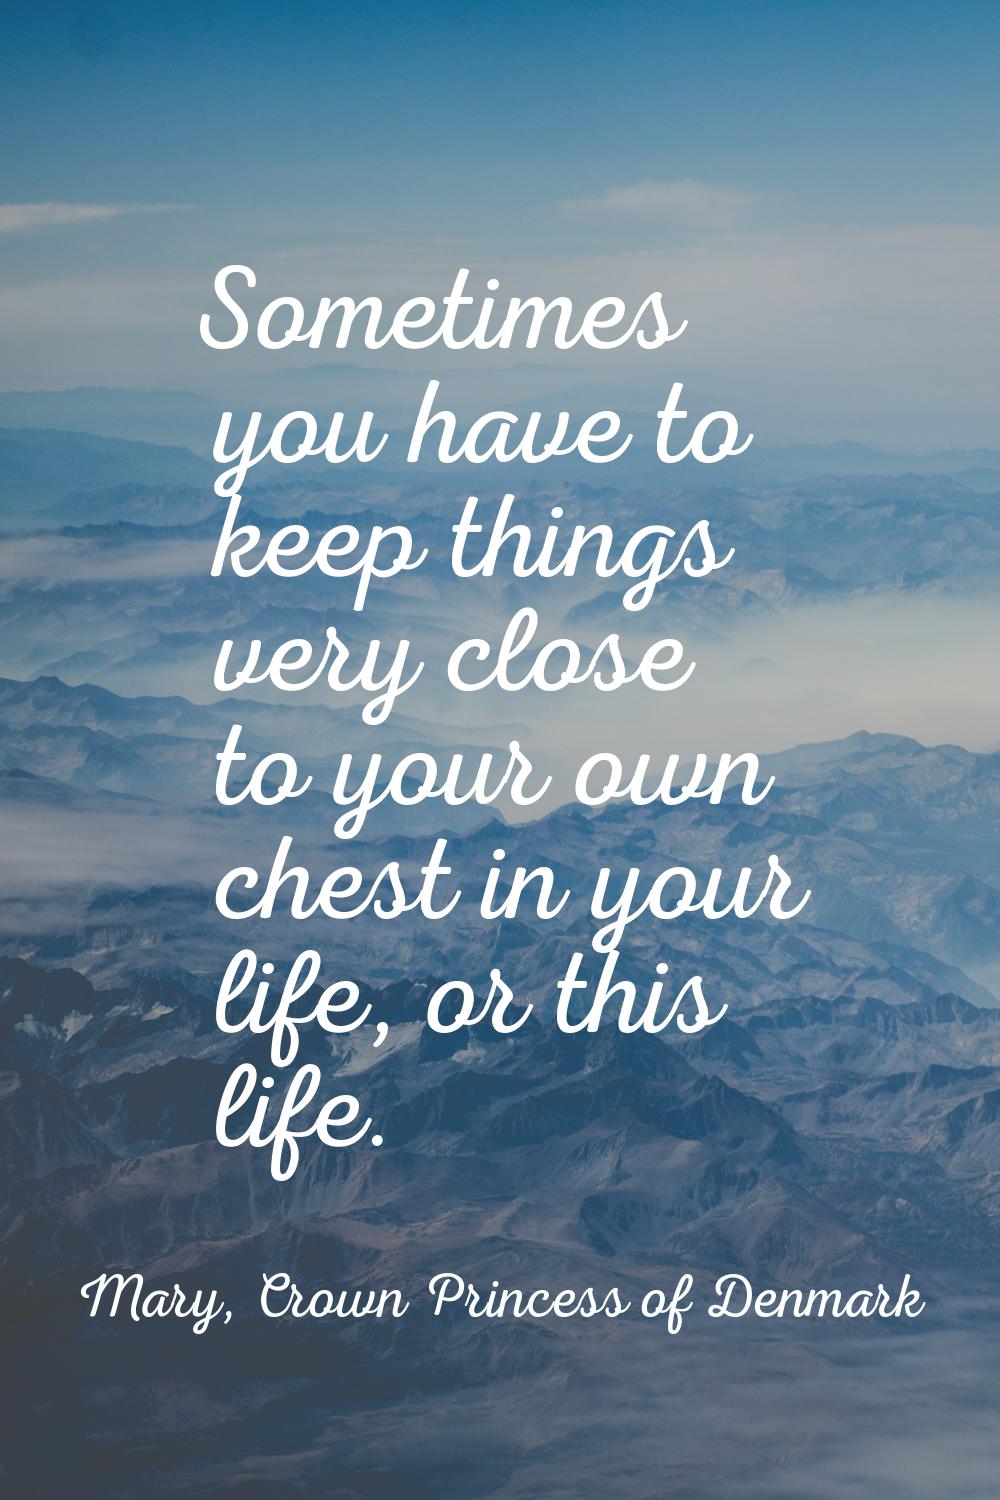 Sometimes you have to keep things very close to your own chest in your life, or this life.